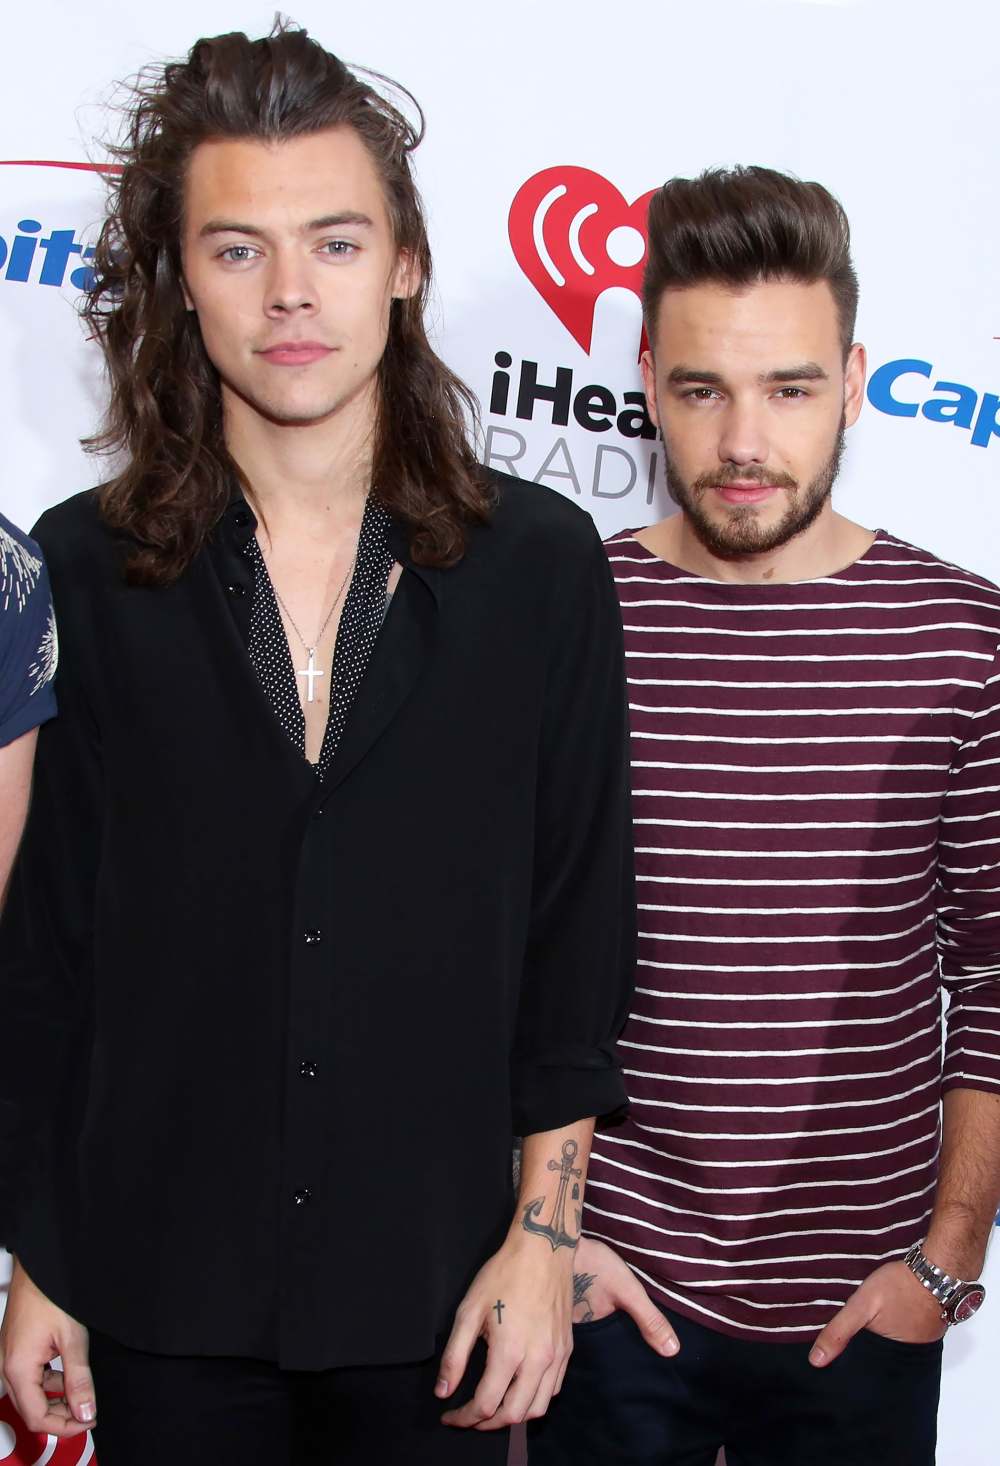 Liam Payne Defends Former One Direction Bandmate Harry Styles' Vogue Cover